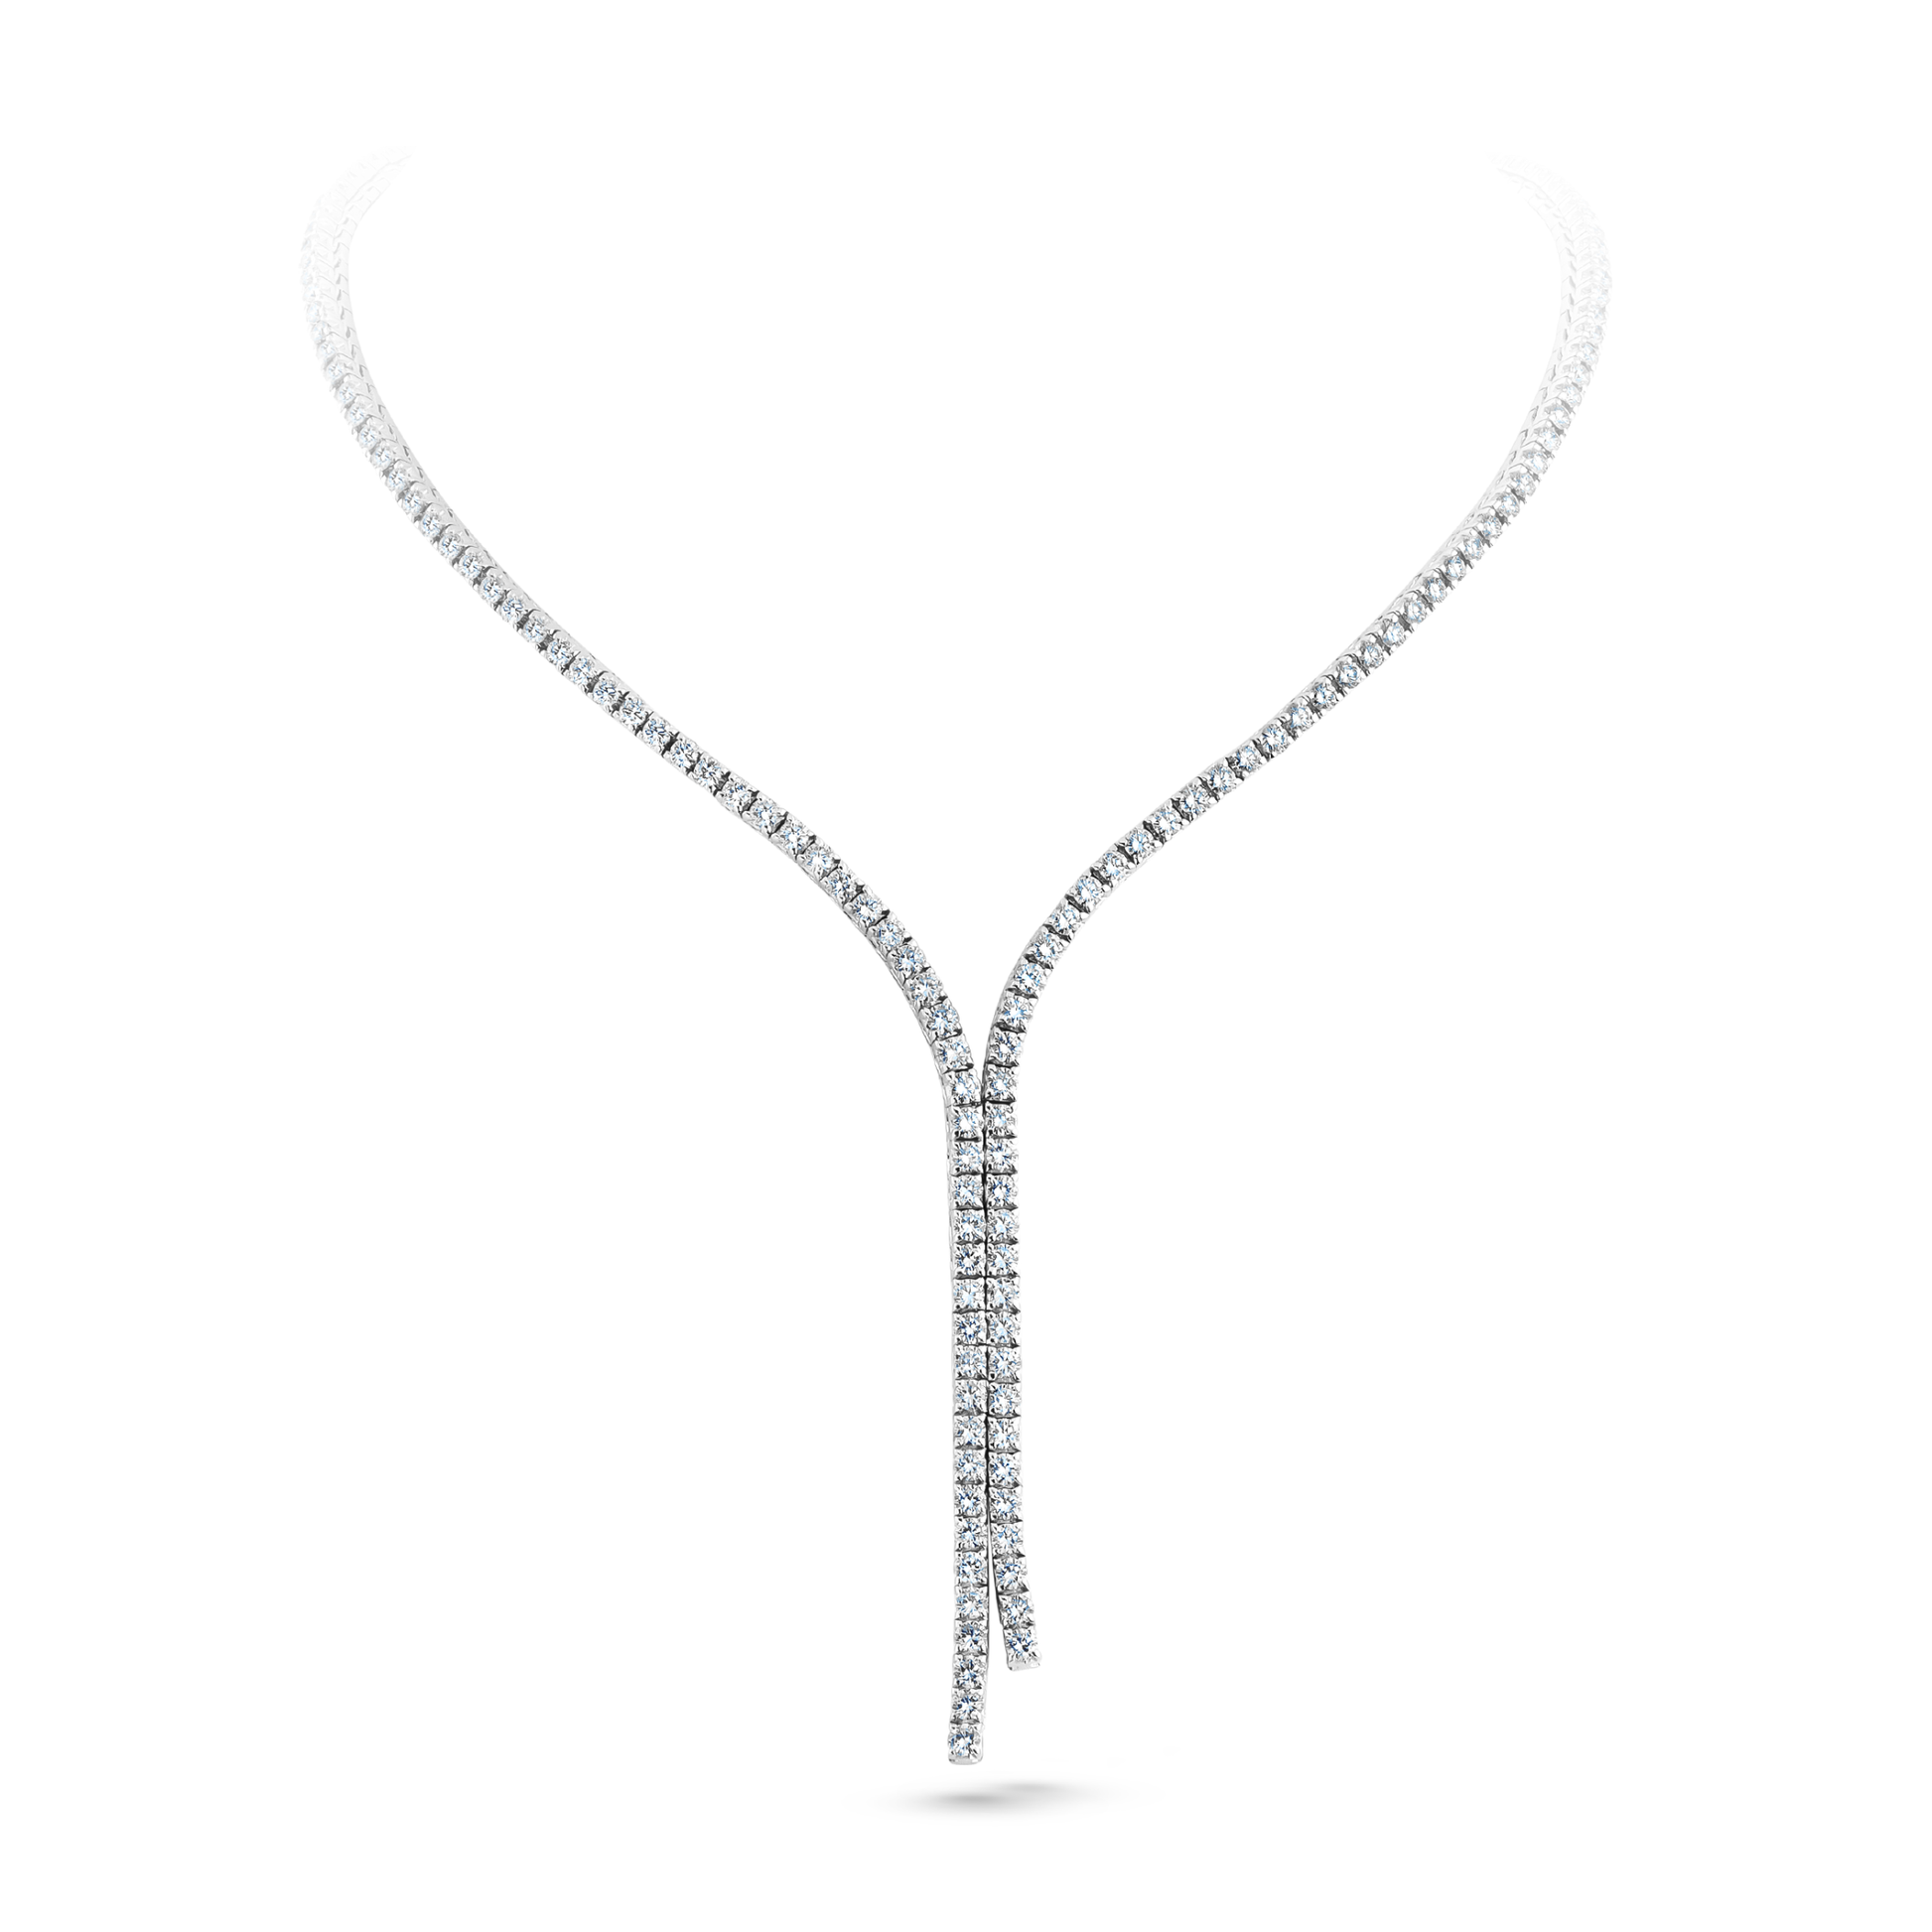 Oliver Heemeyer Scarf diamond necklace made of 18k white gold.